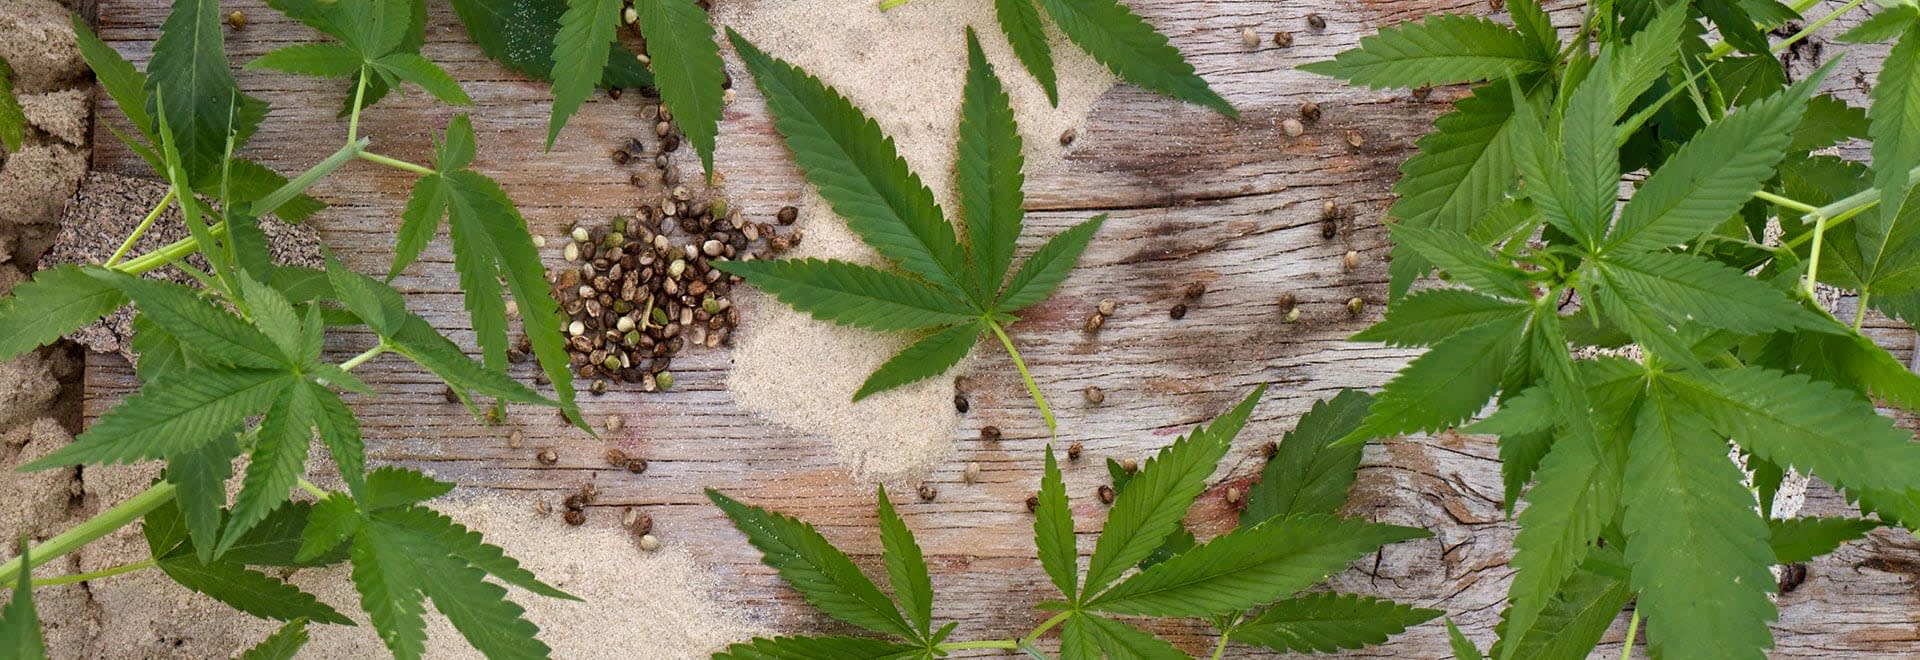 A photo of hemp leaves lying on wooden surface